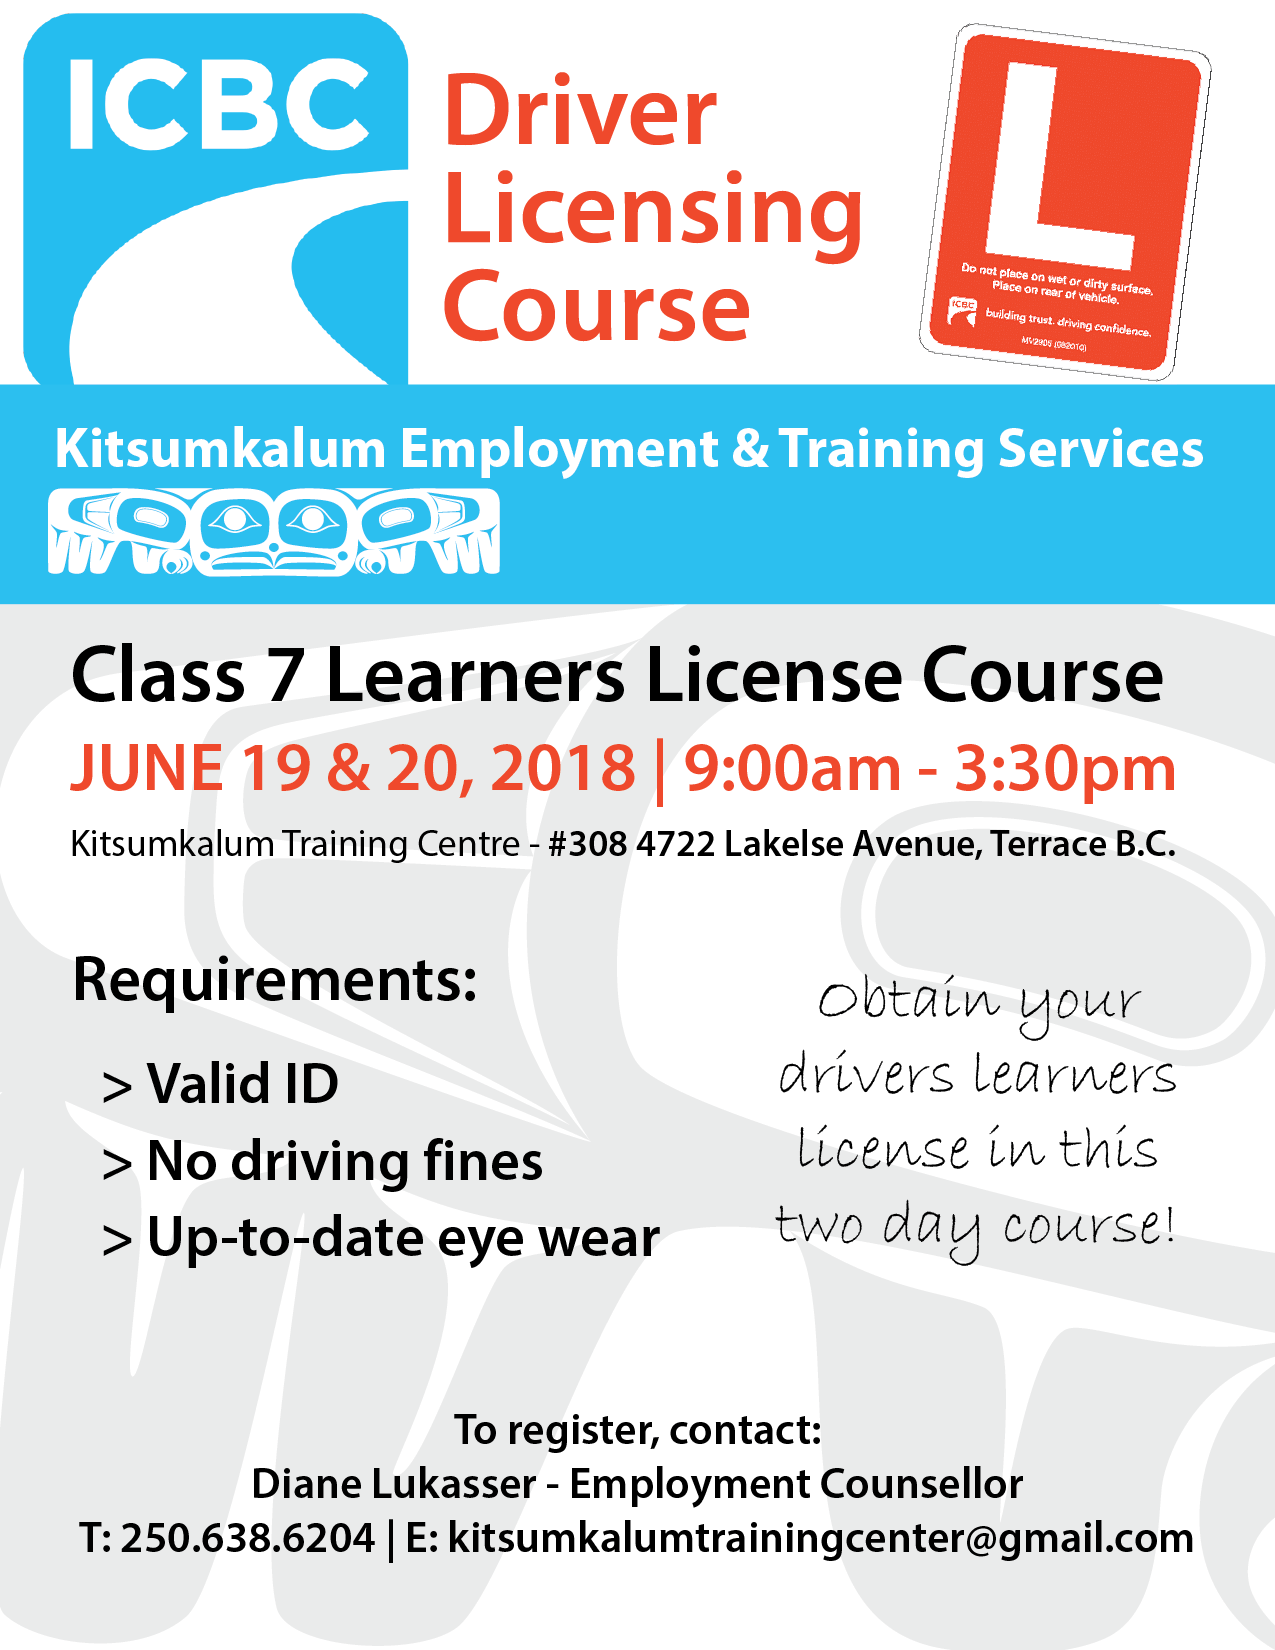 Two Day Driver Licensing Course June 2018